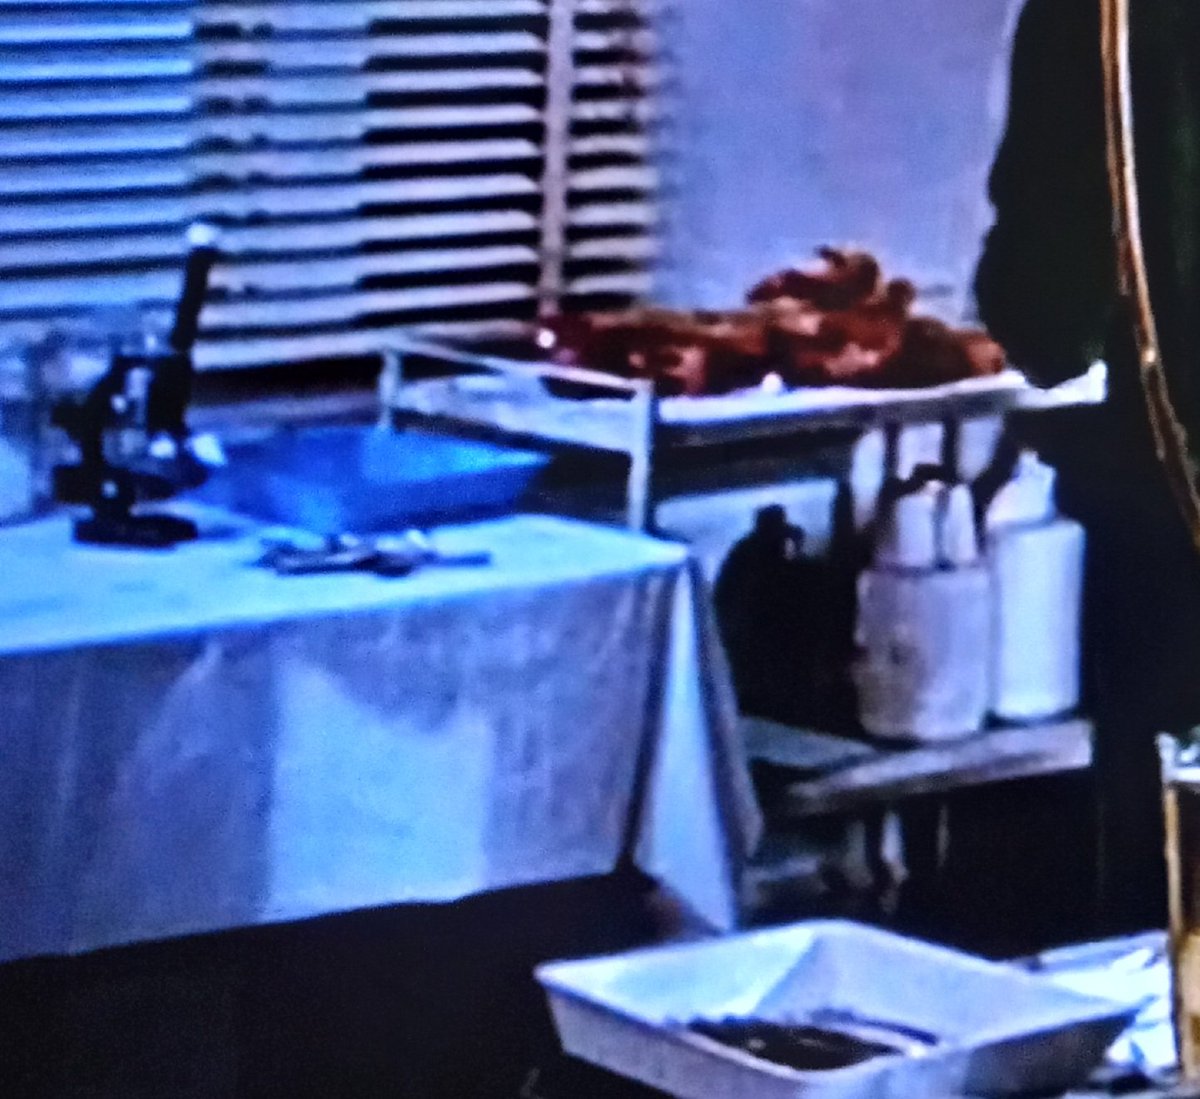 Whyyy is there a tablecloth in the lab? 😭😭😭
#BMovieManiacs